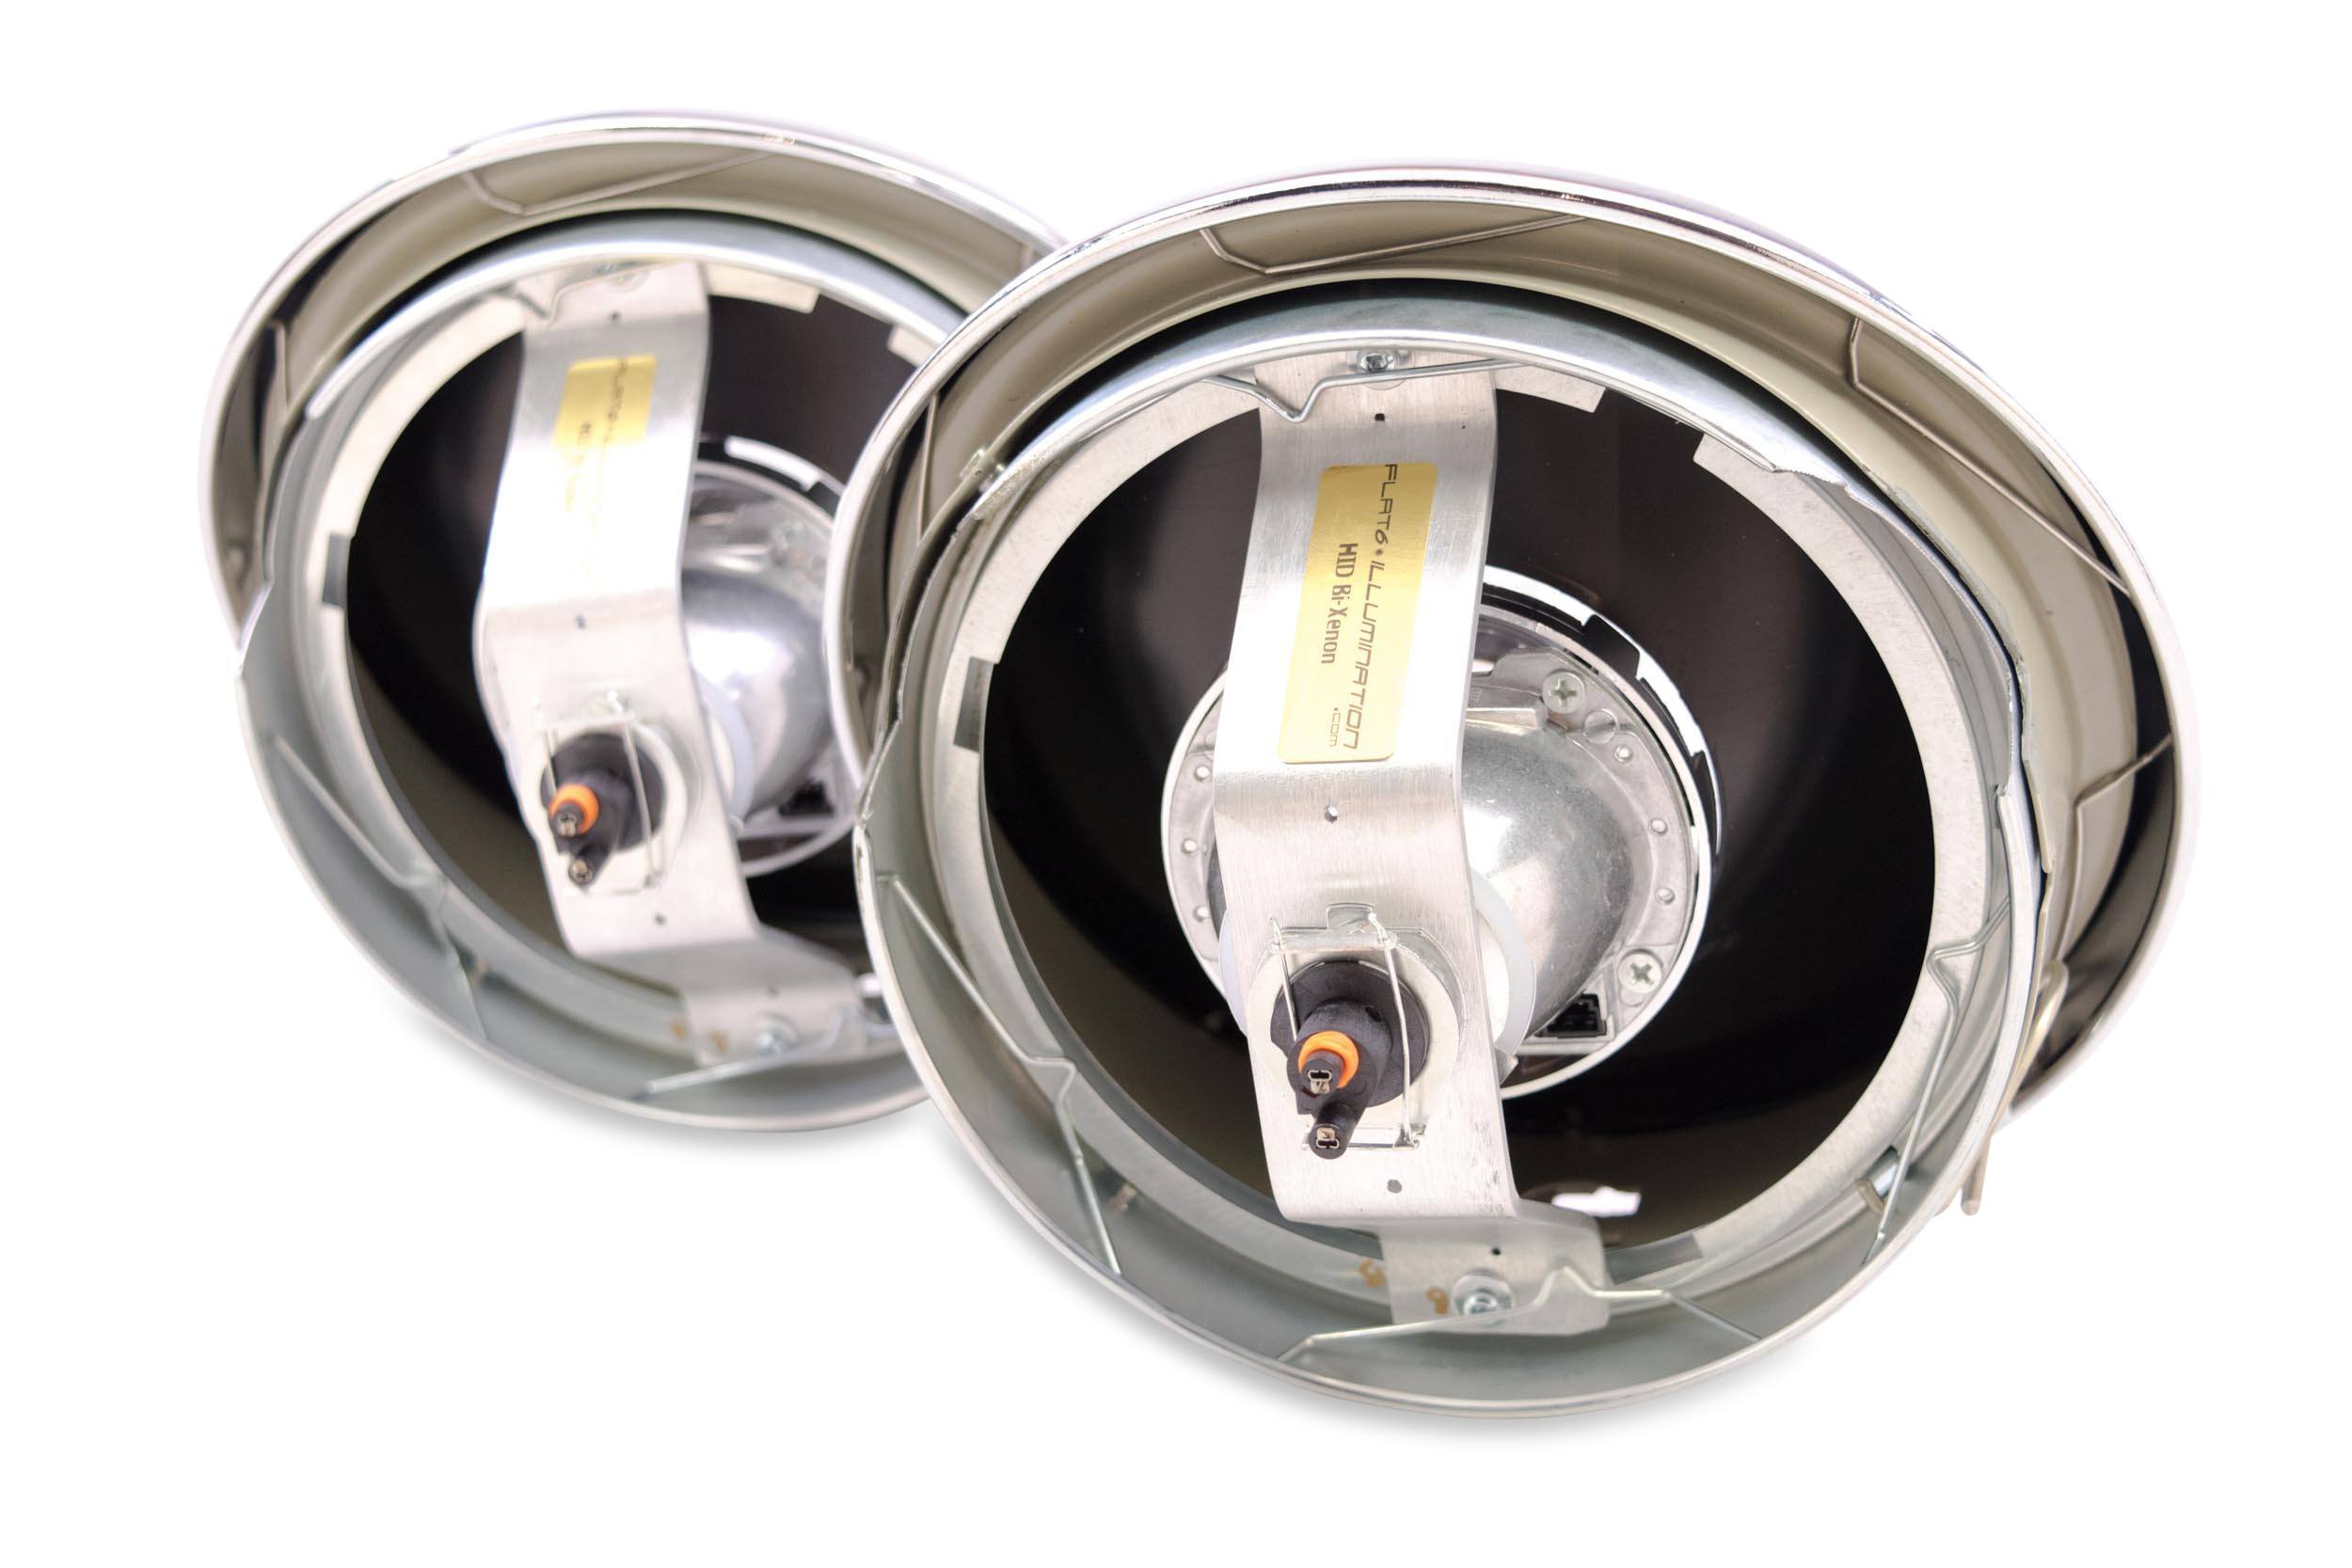 What Are Xenon Headlights?